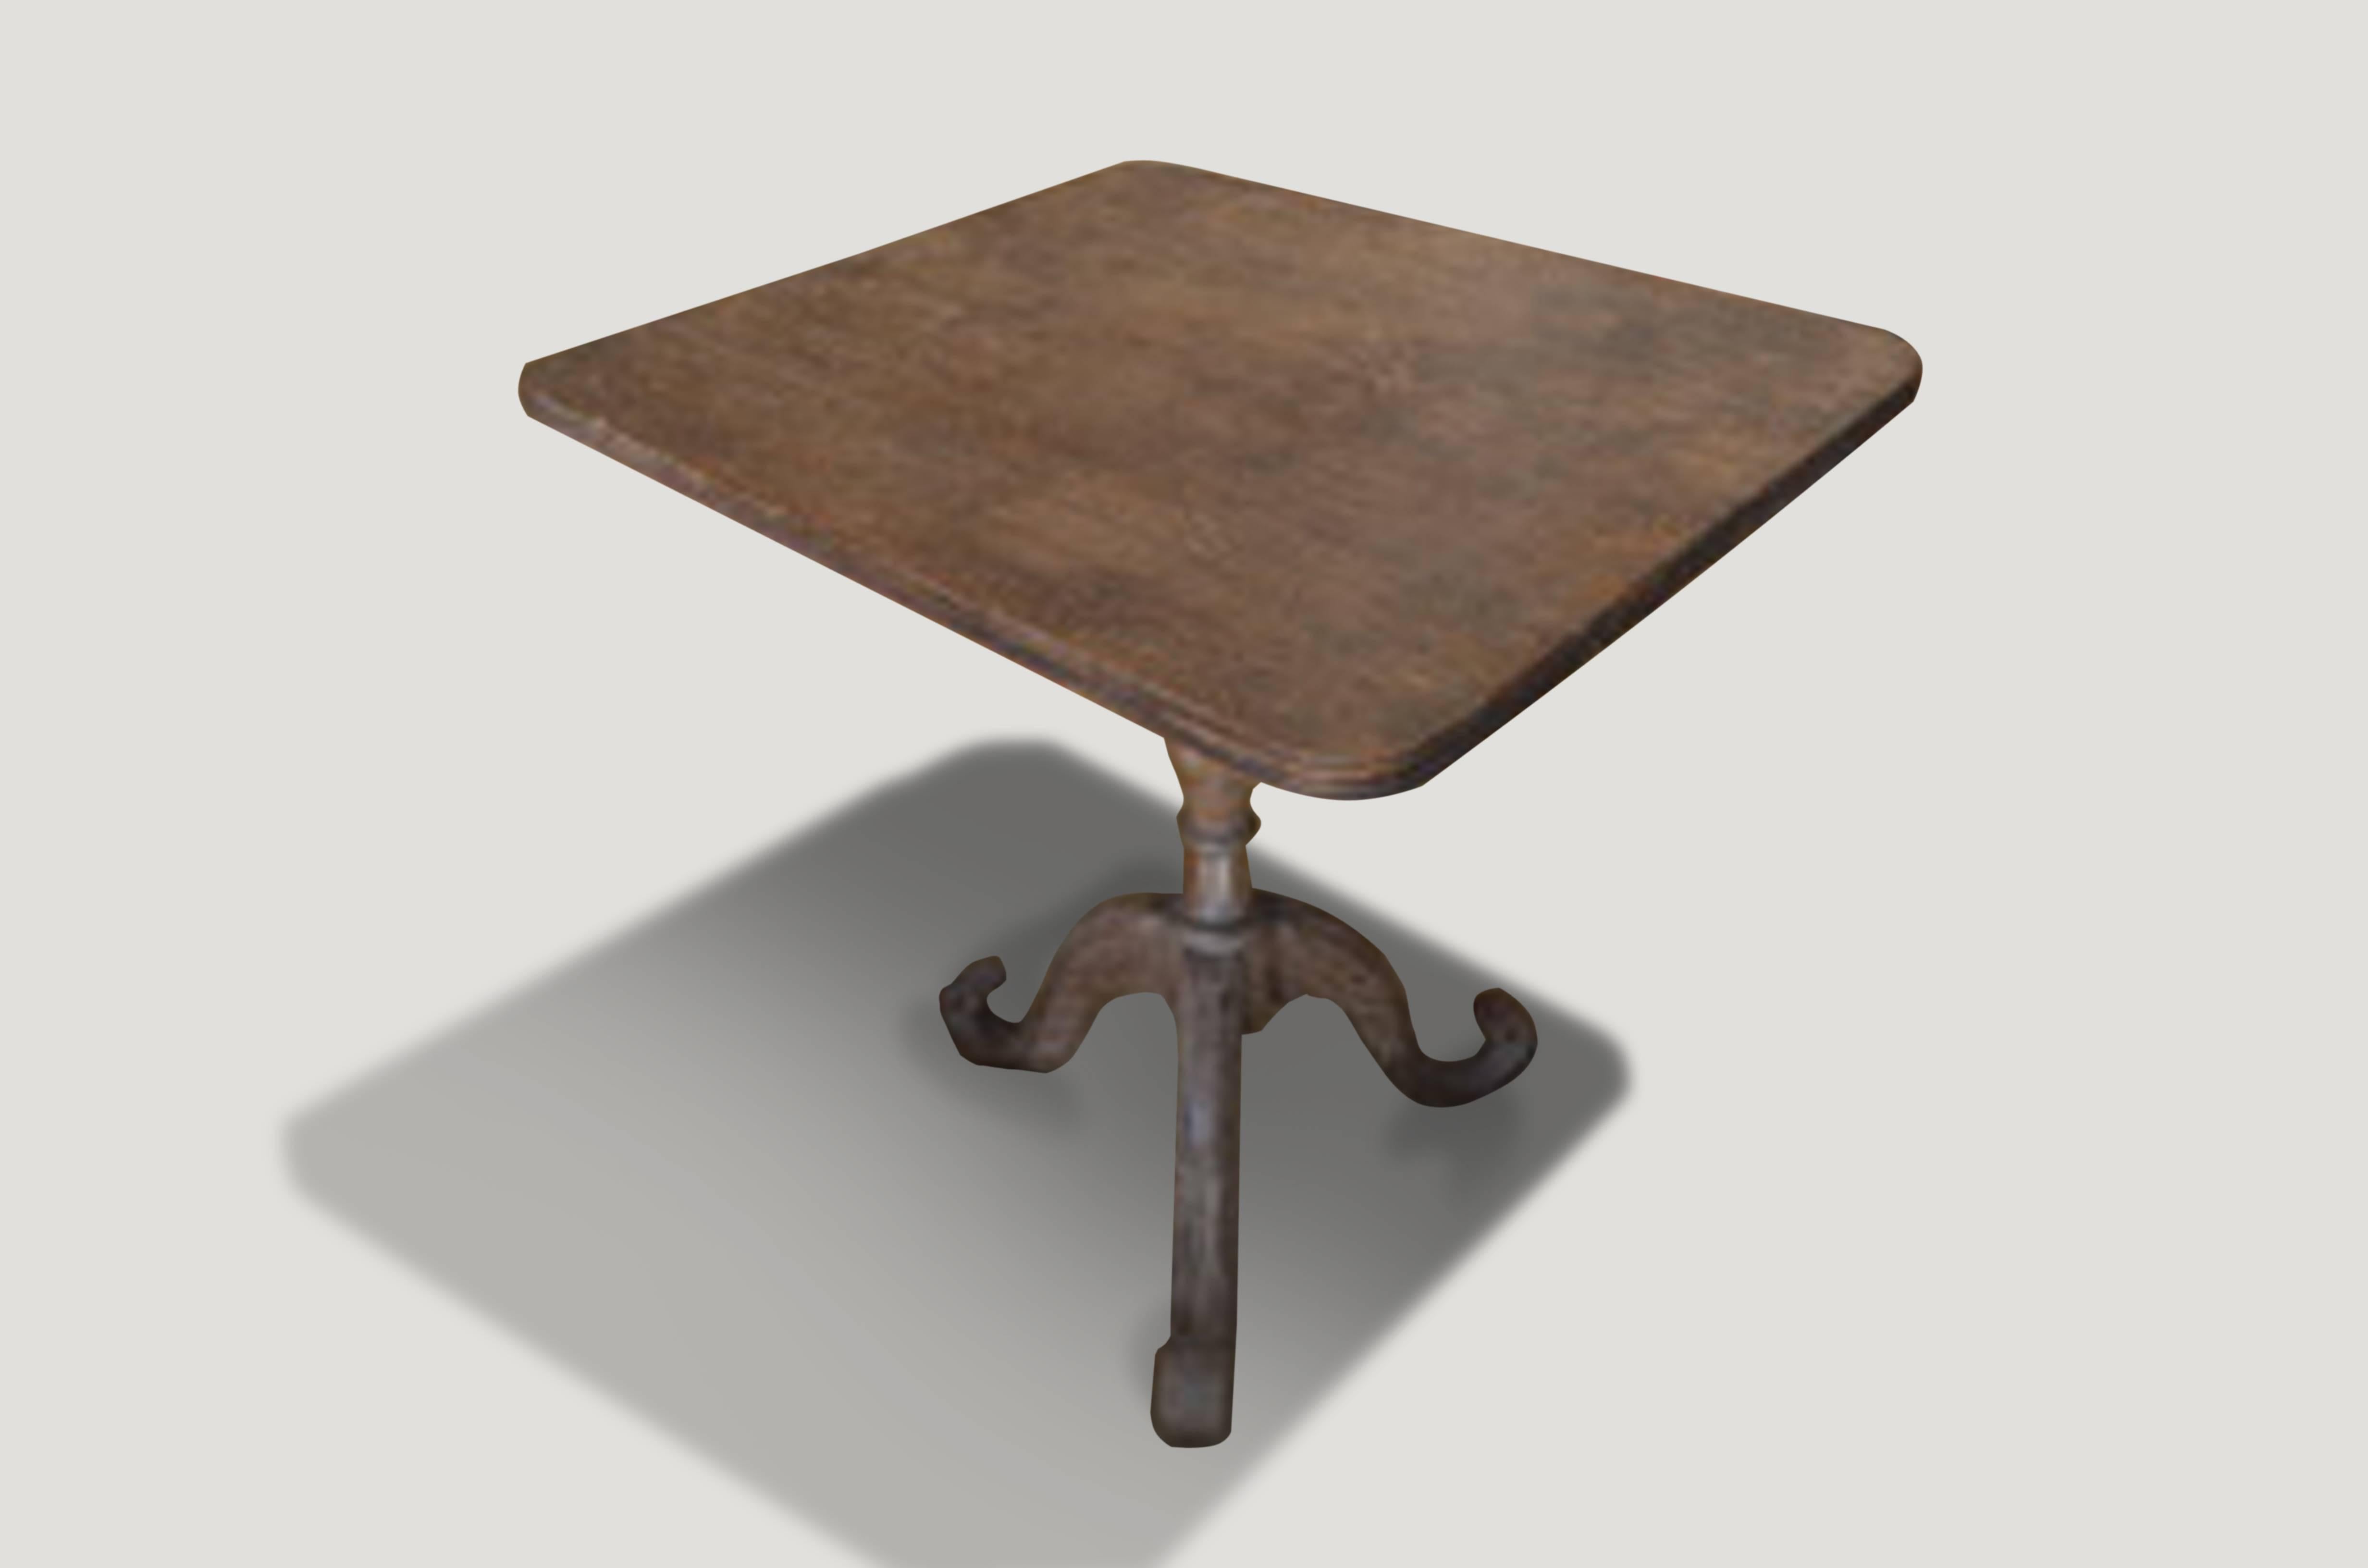 Beautiful, hand-carved antique teak wood table from Madura. The top is cut from a single slab with a hand-carved bevelled edge. The base is also hand-carved with stunning detail. Large enough for dining for two a game table, or perfect as a side